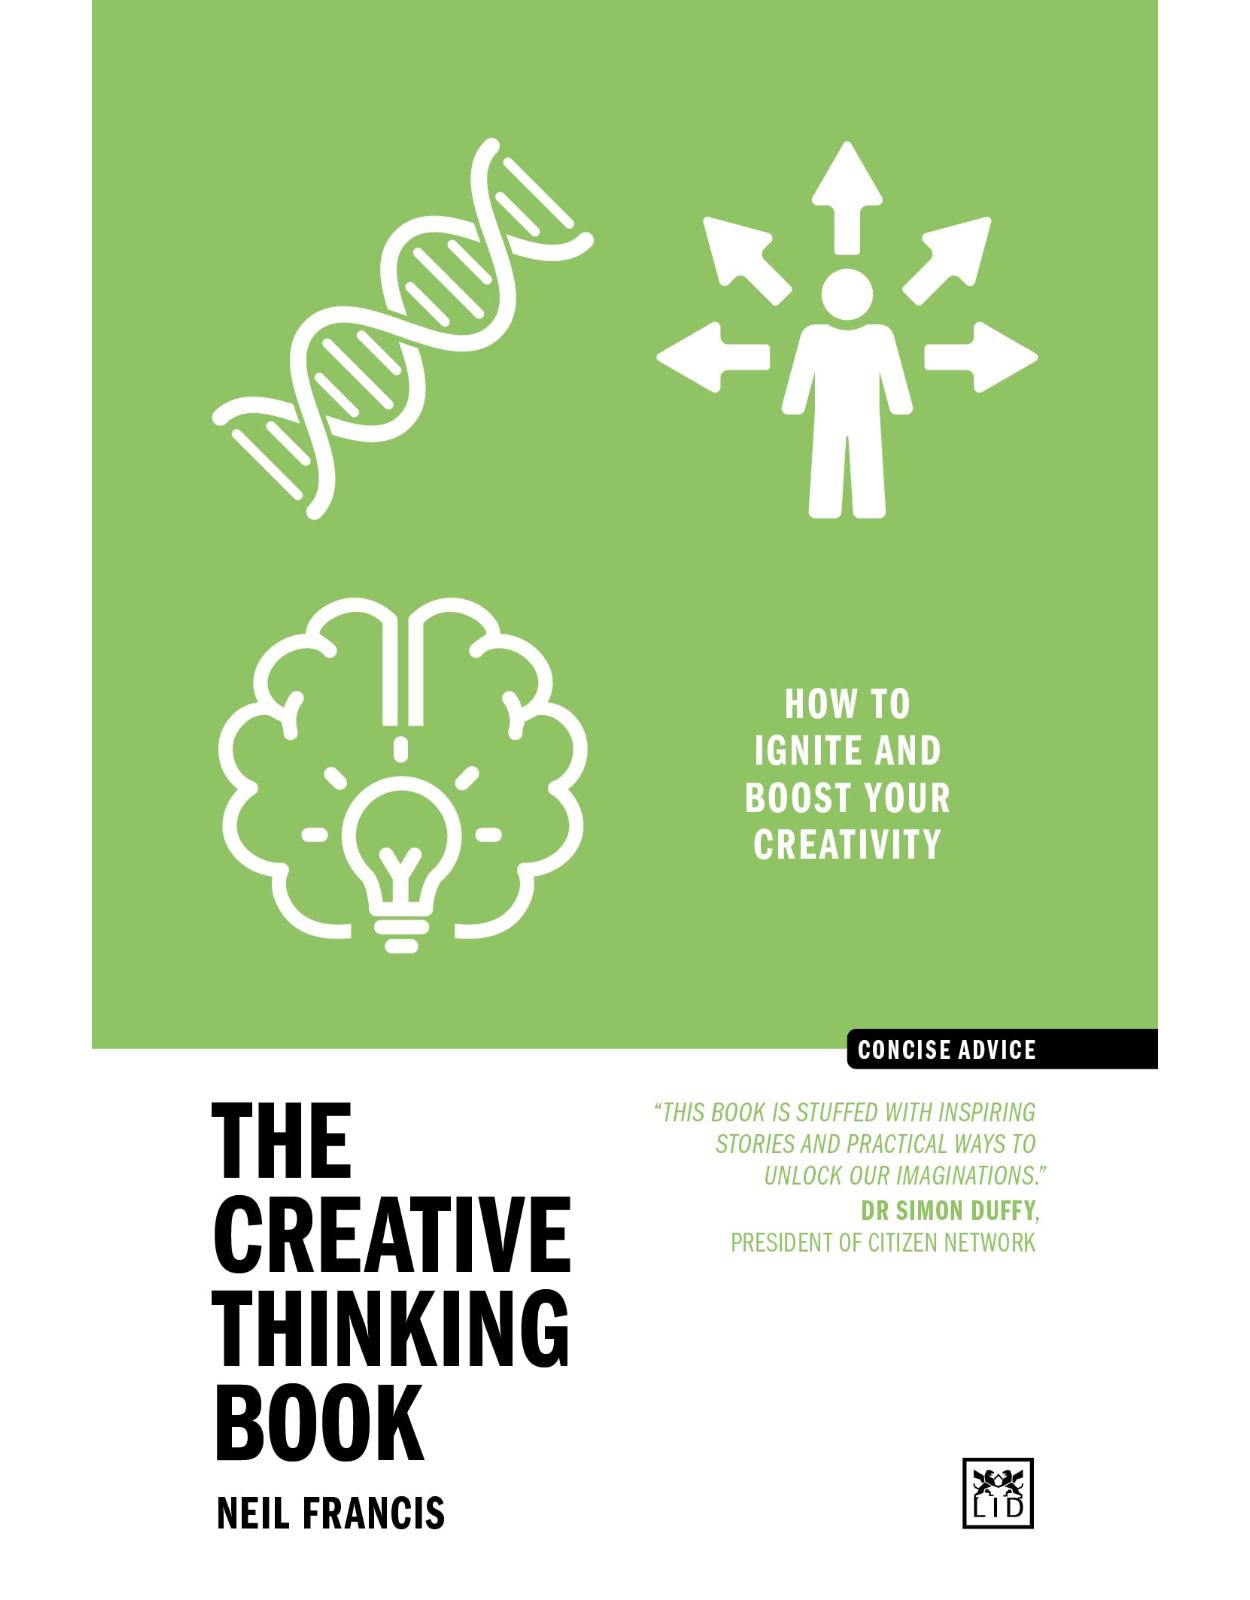 The Creative Thinking Book: How to Ignite and Boost Your Creativity